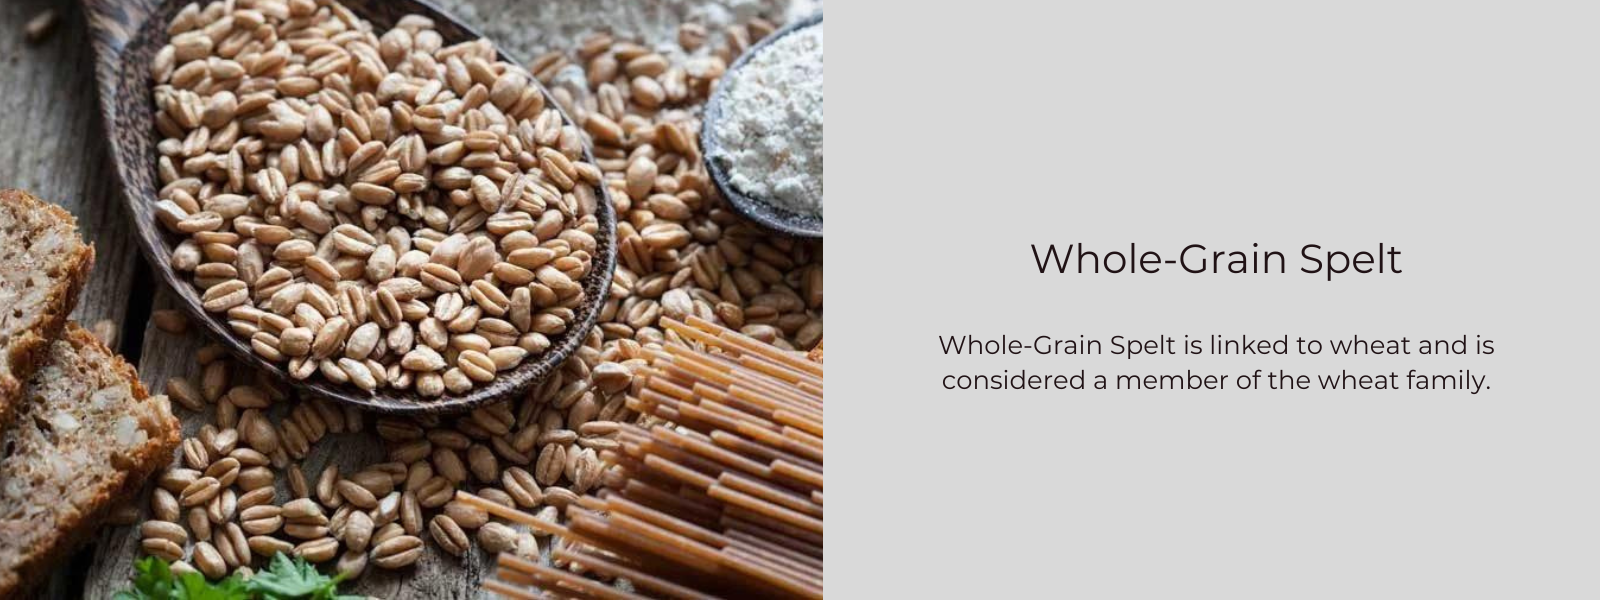 Whole-Grain Spelt – Health Benefits, Uses and Important Facts,